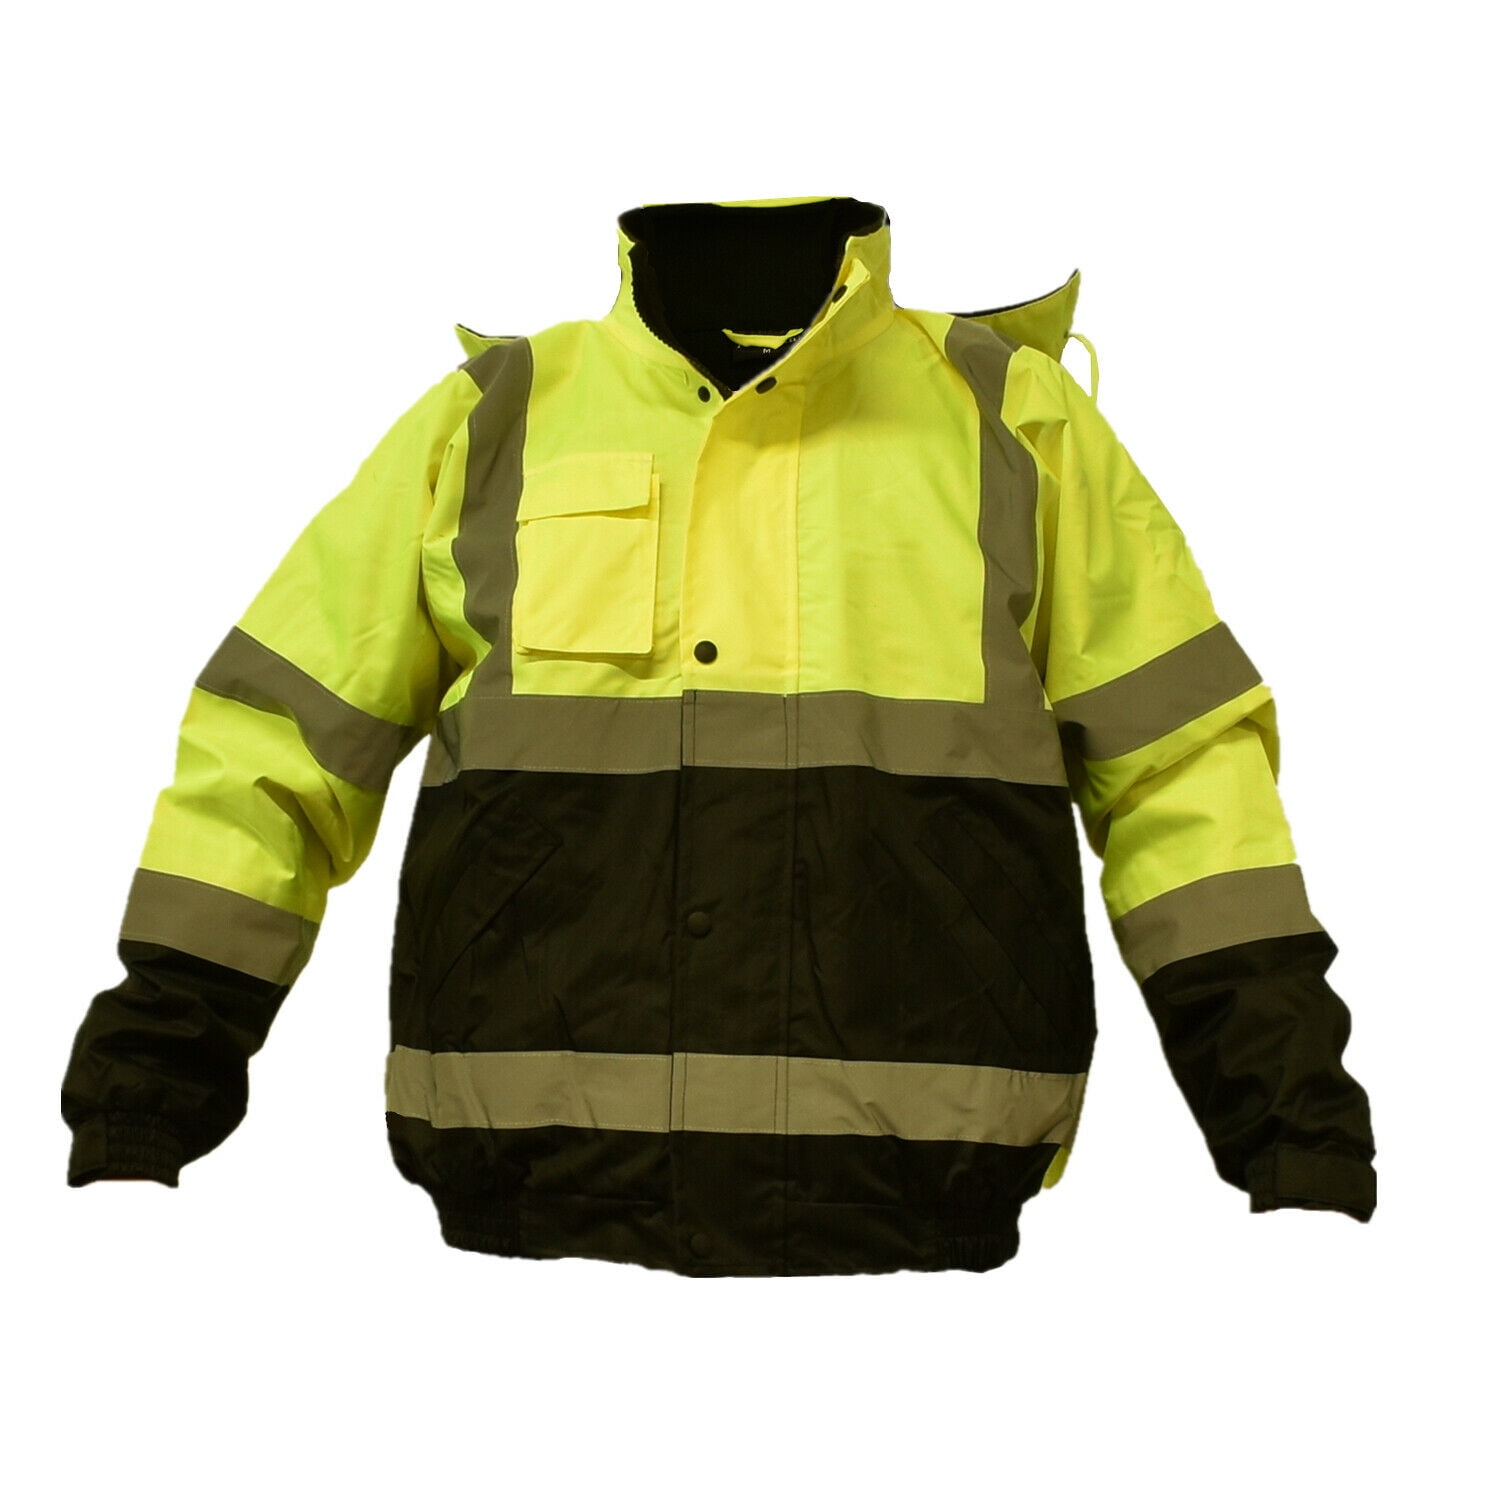 Hi-Vis Lime Bomber Jacket Class 3 Insulated Reflective Bomber High  Visibility Waterproof Jacket-S-5XL.YELLOW - Walmart.com